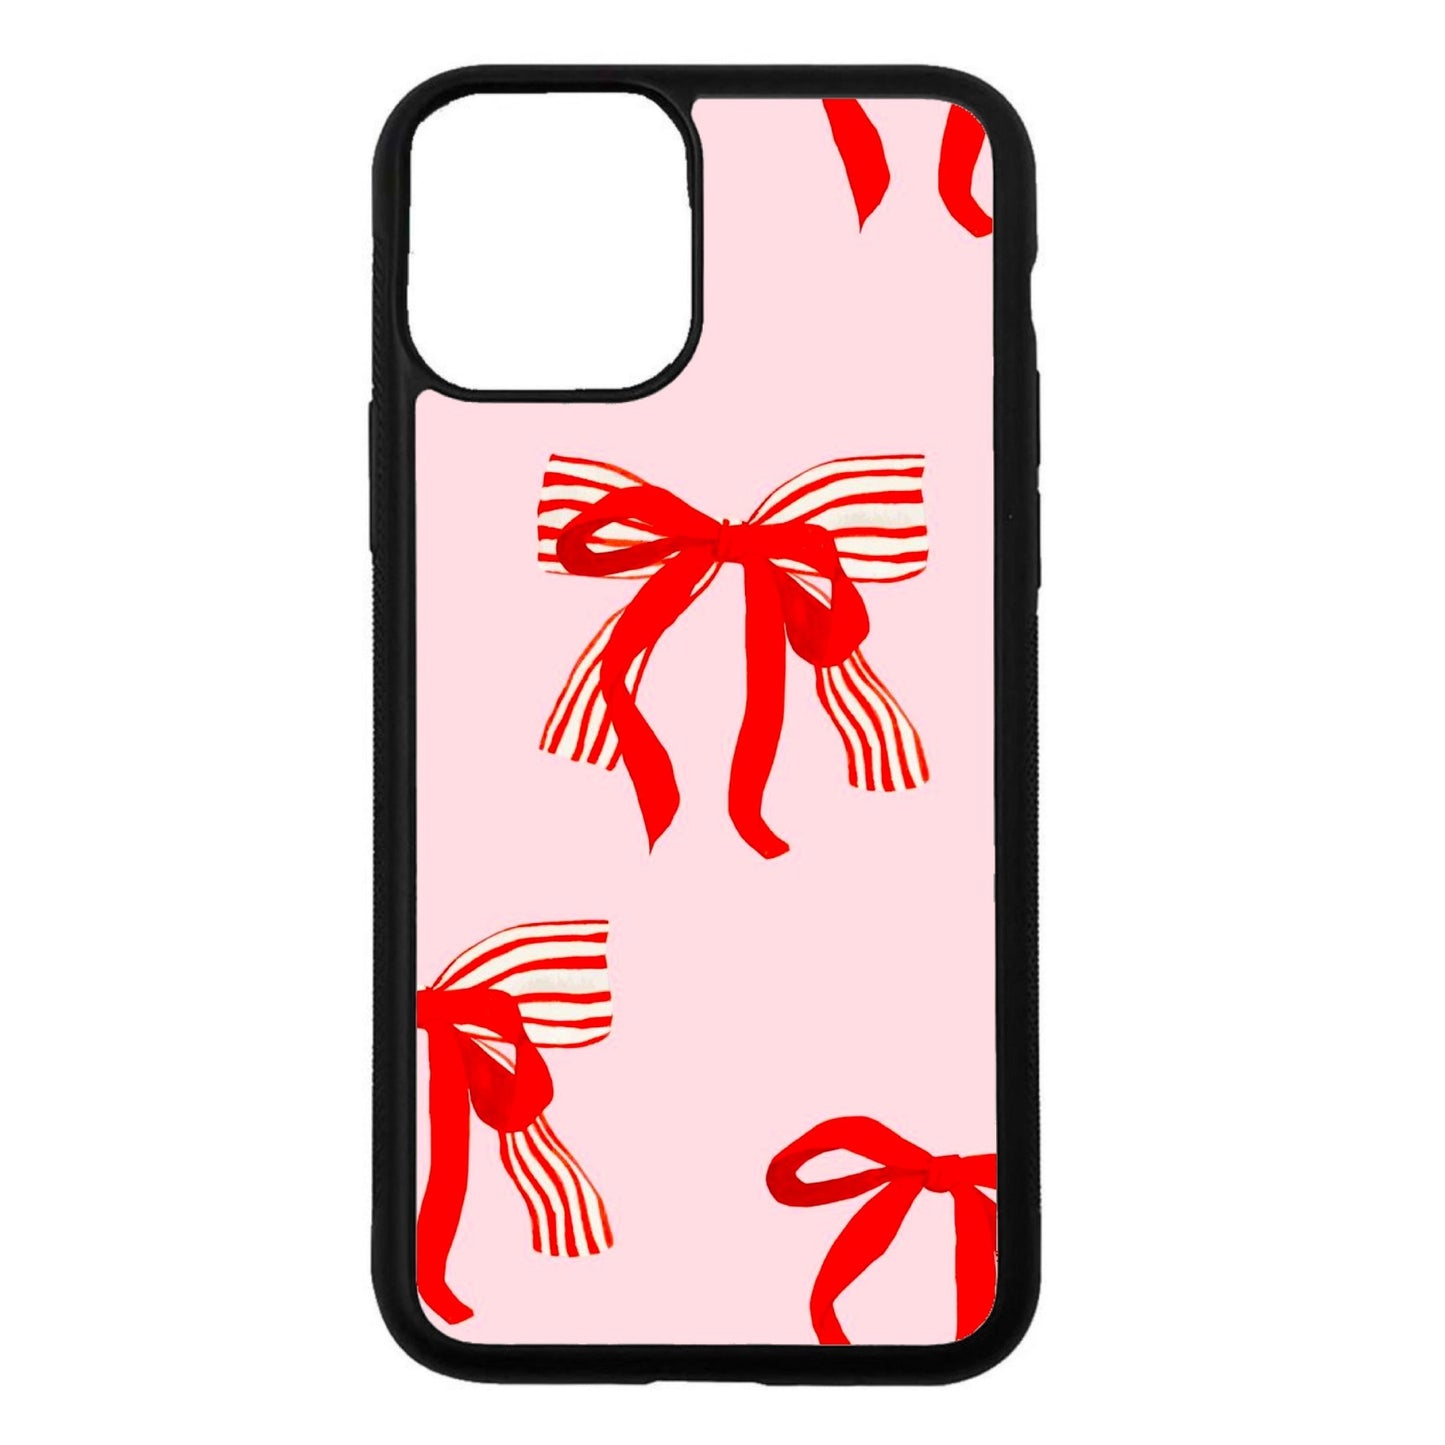 red bows - MAI CASES